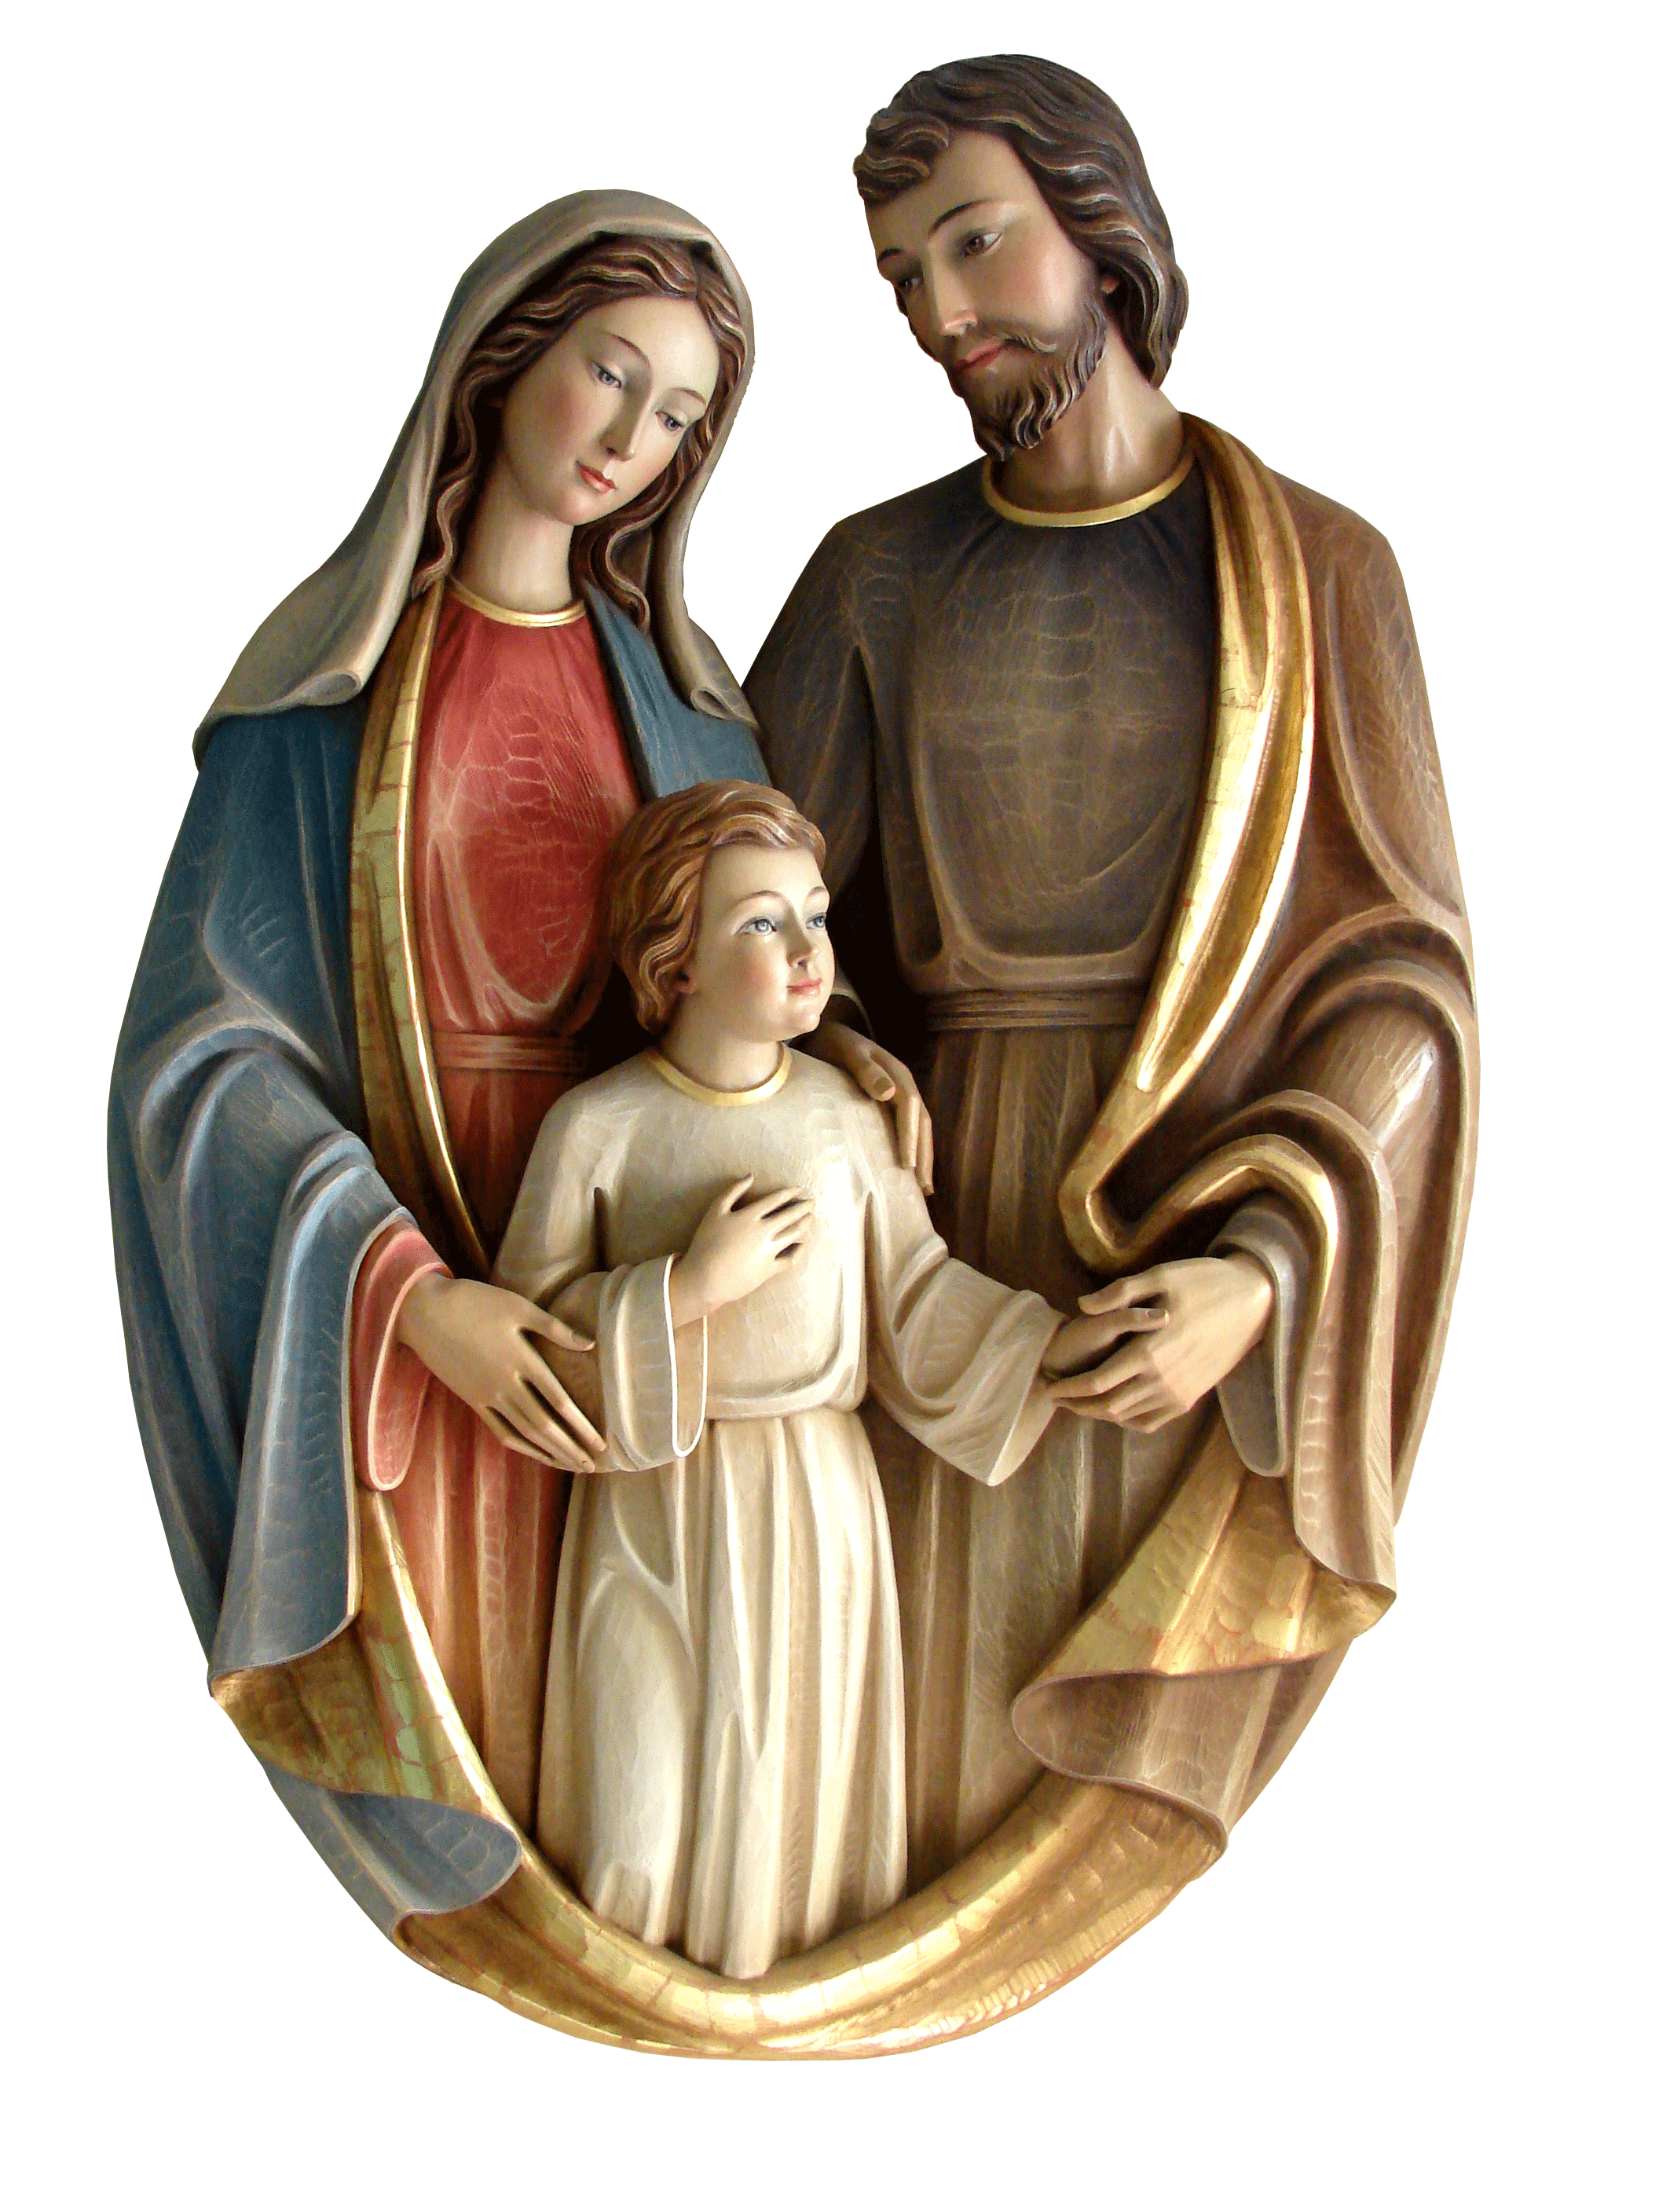 The “Holy Family,” Normal? | Soulful Muse